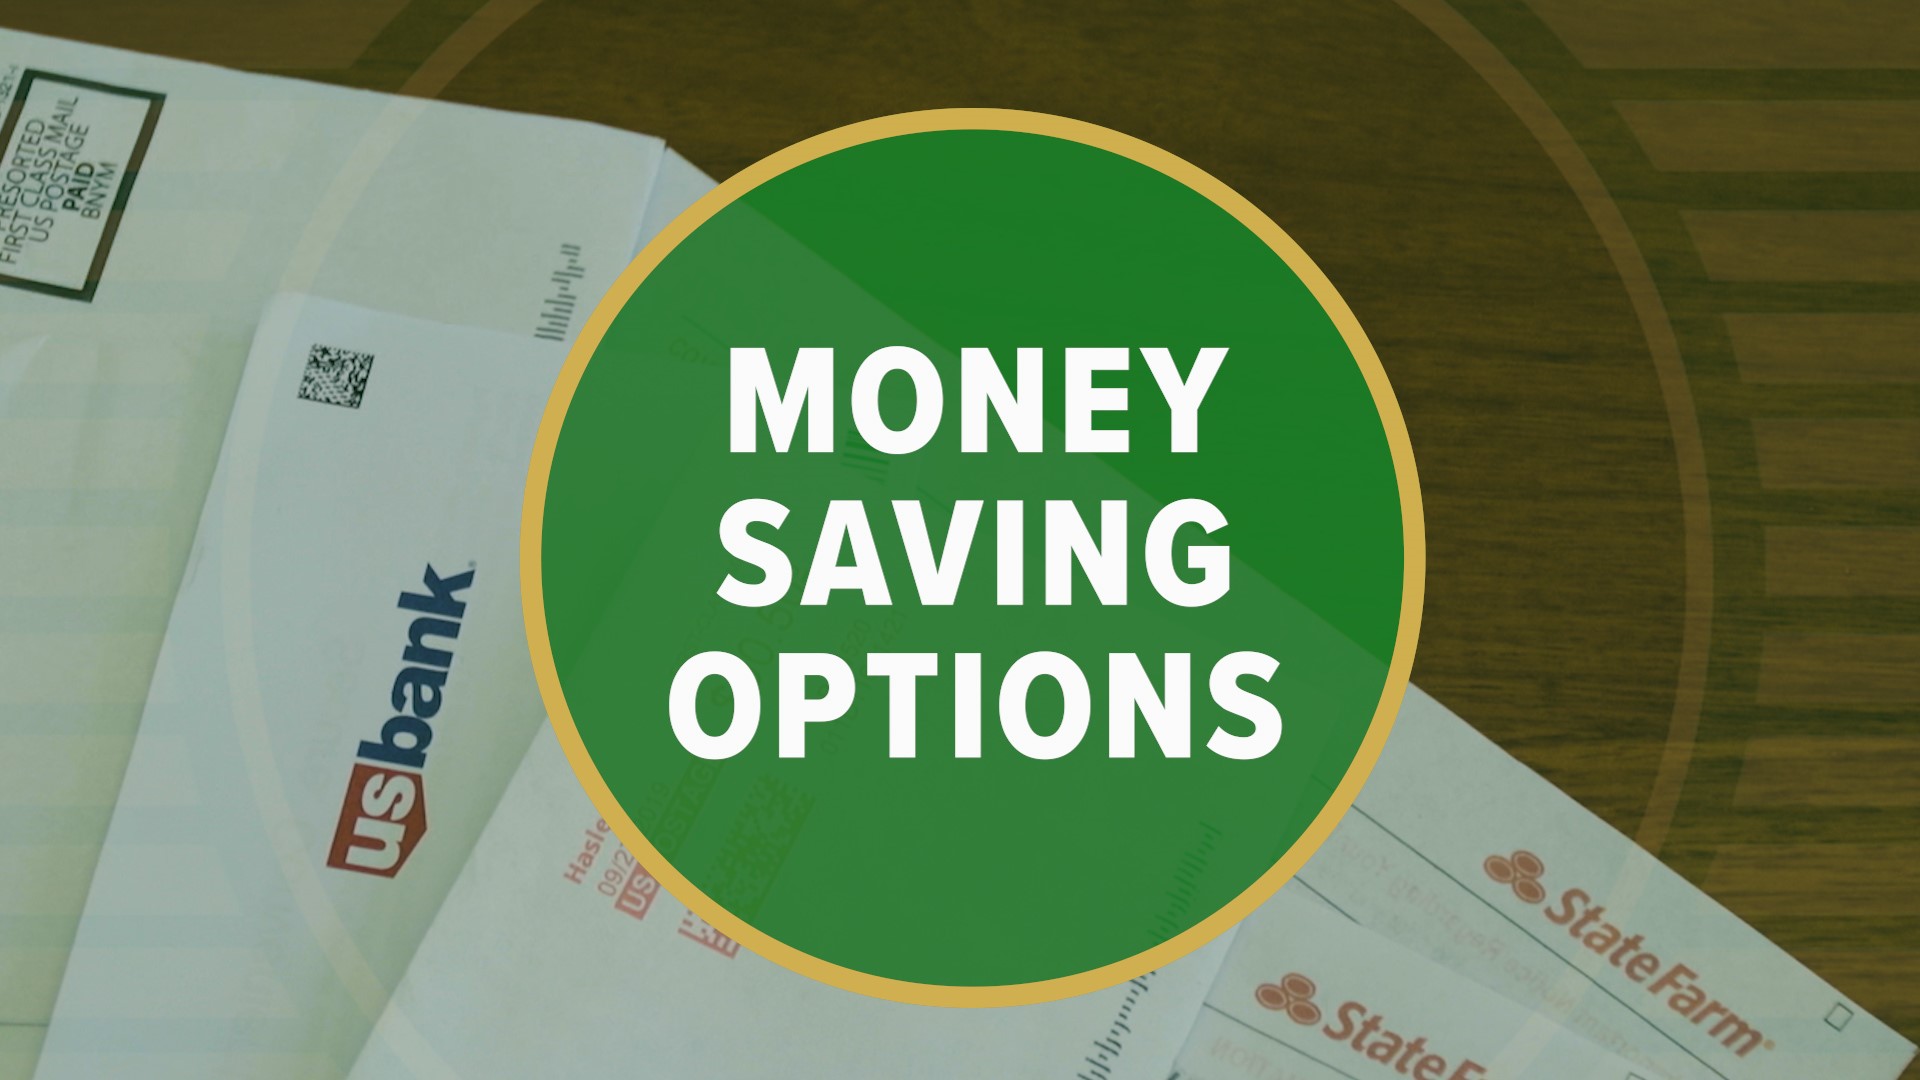 A financial advisor shares no-nonsense tips to save money on your monthly bills.